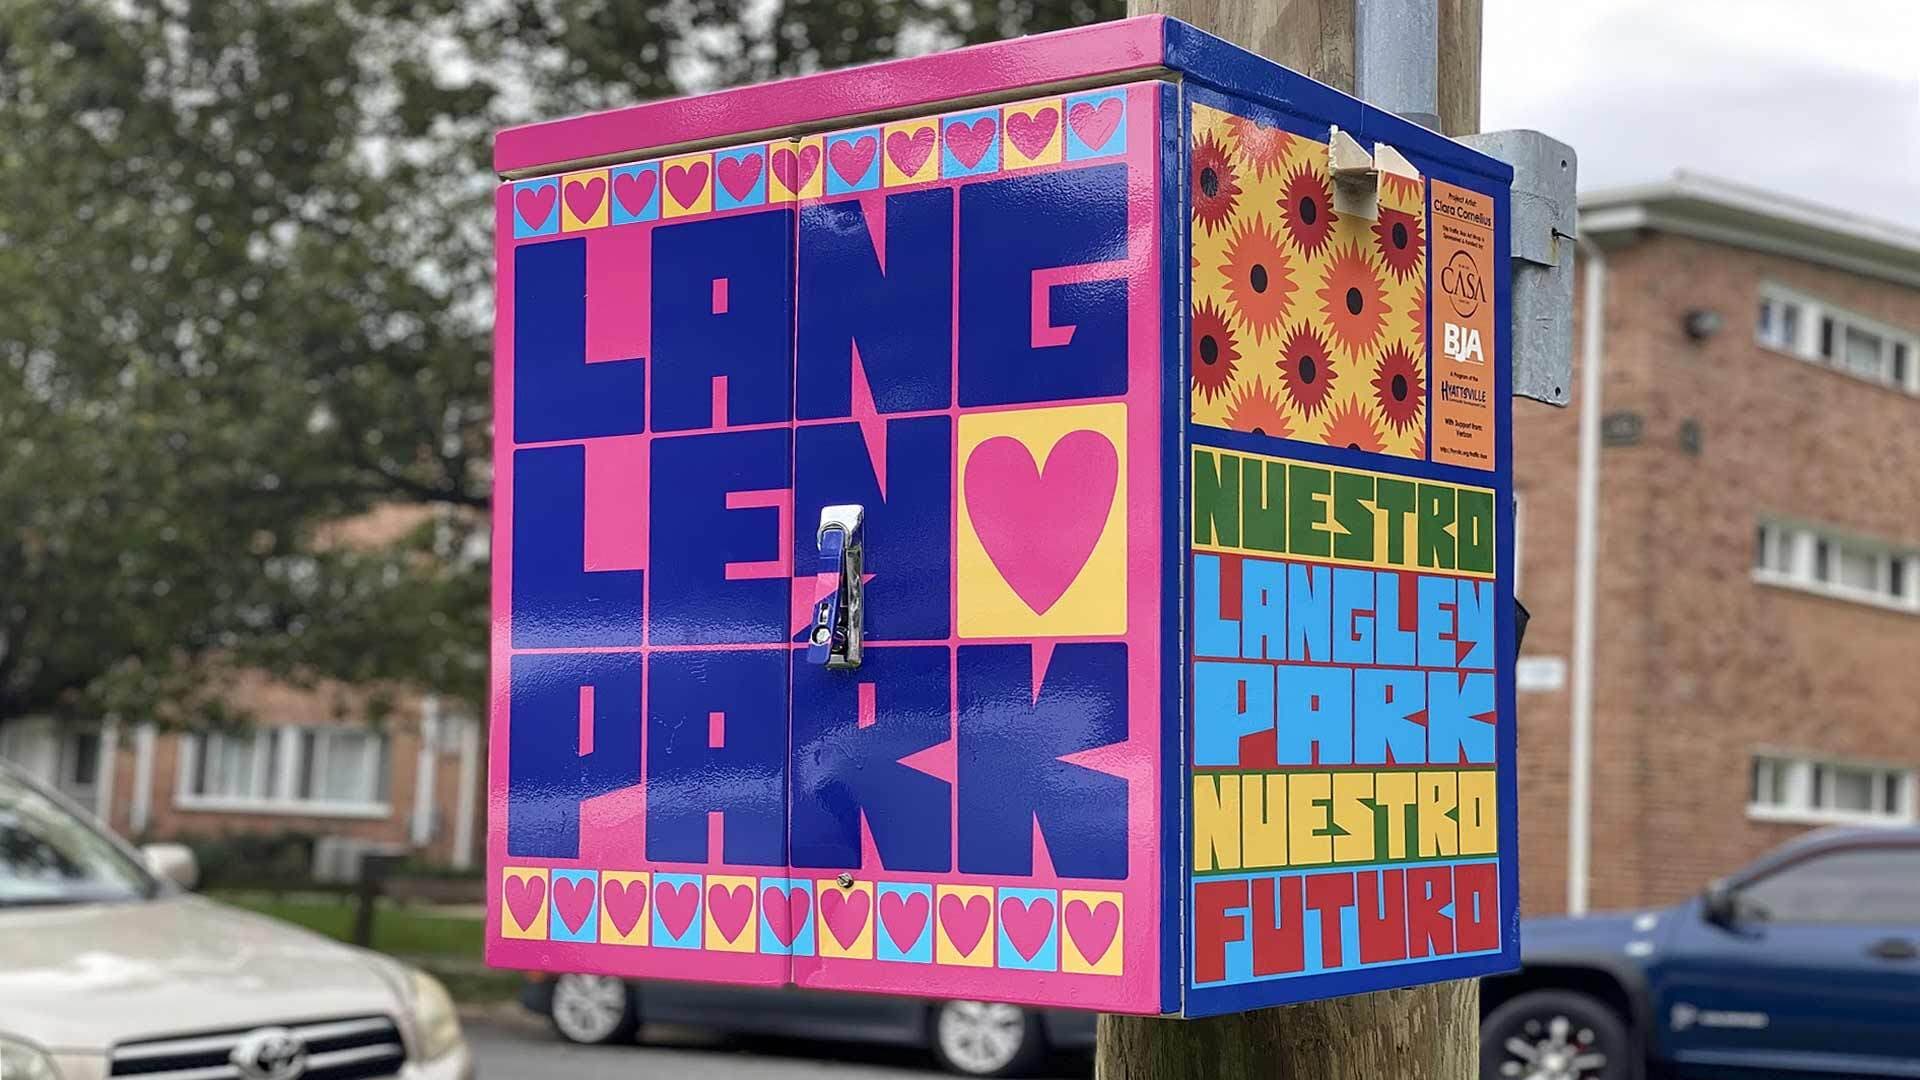 Colorful Langley Park utility box